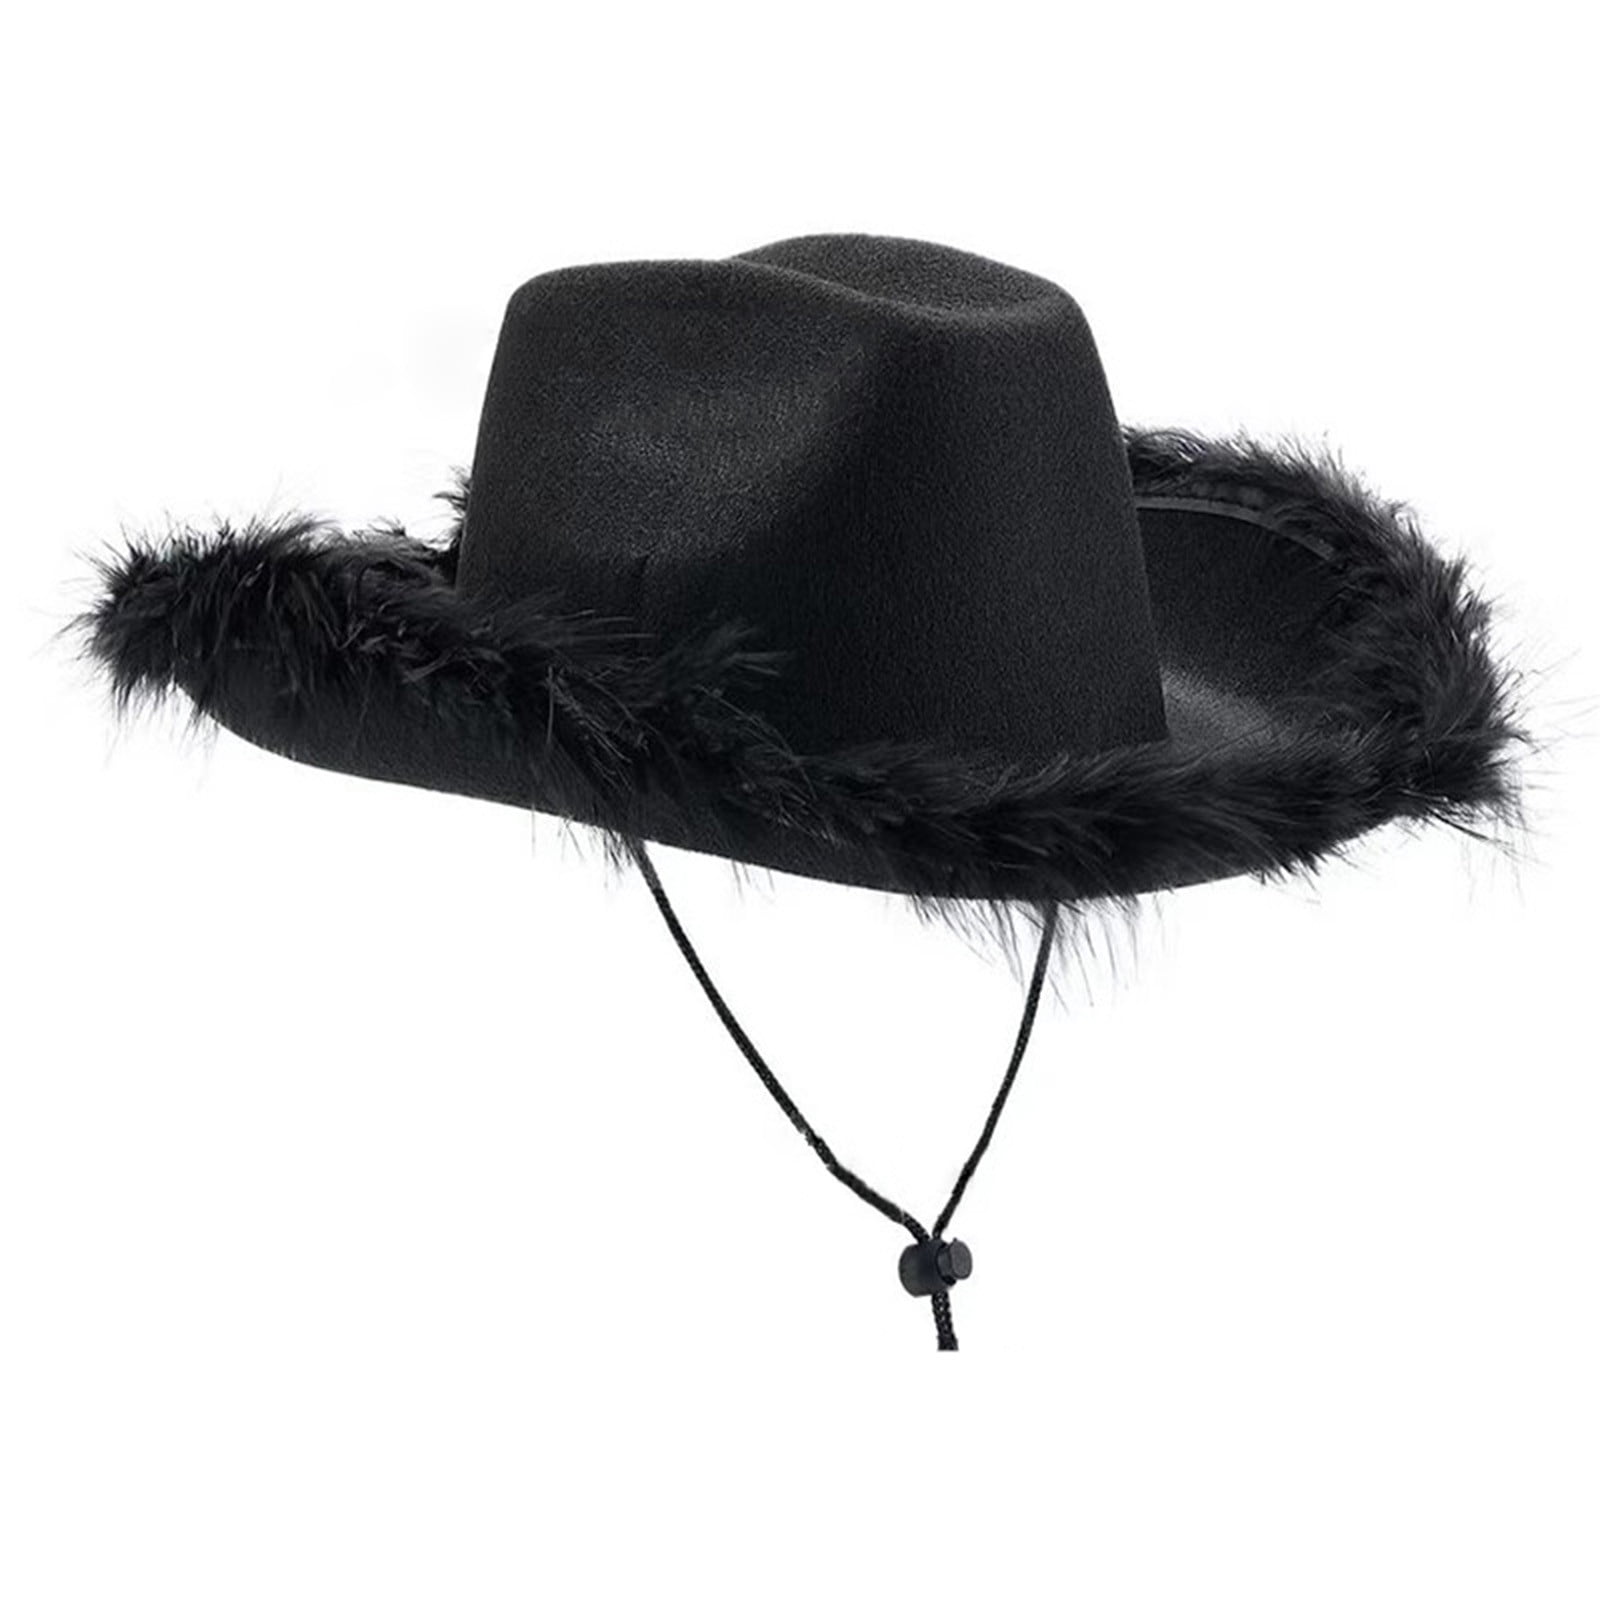 Winter Savings !40g Turkey Feathers Hat with Feathers Boa Novelty